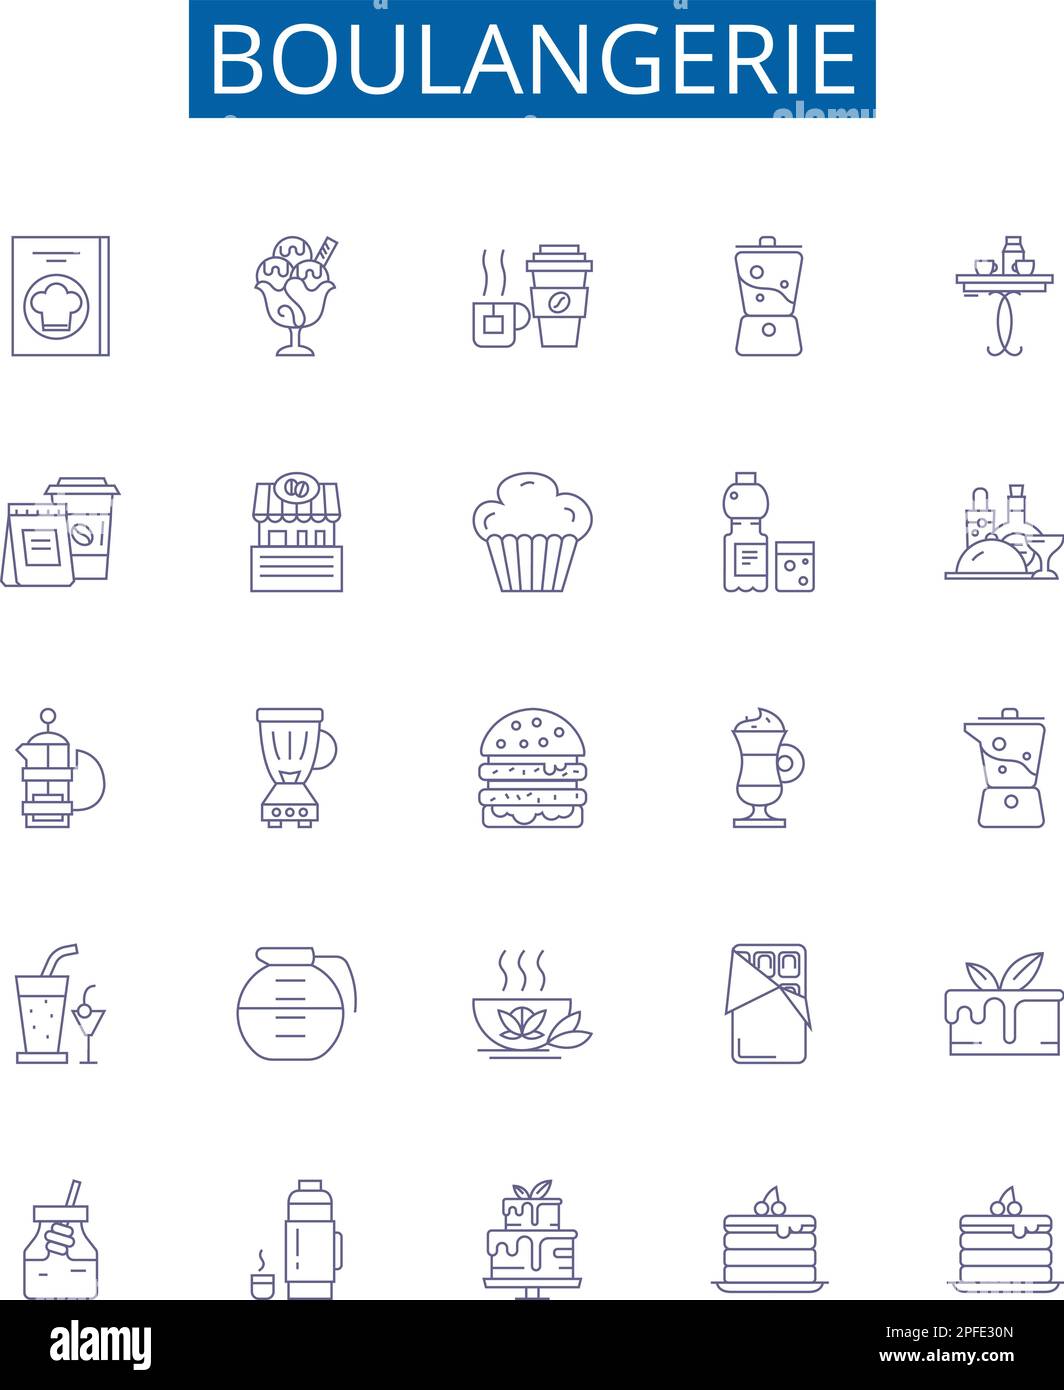 Boulangerie line icons signs set. Design collection of Bakery, Patisserie, Bread, Croissant, Cookies, Viennoiserie, Cake, Tart outline concept vector Stock Vector